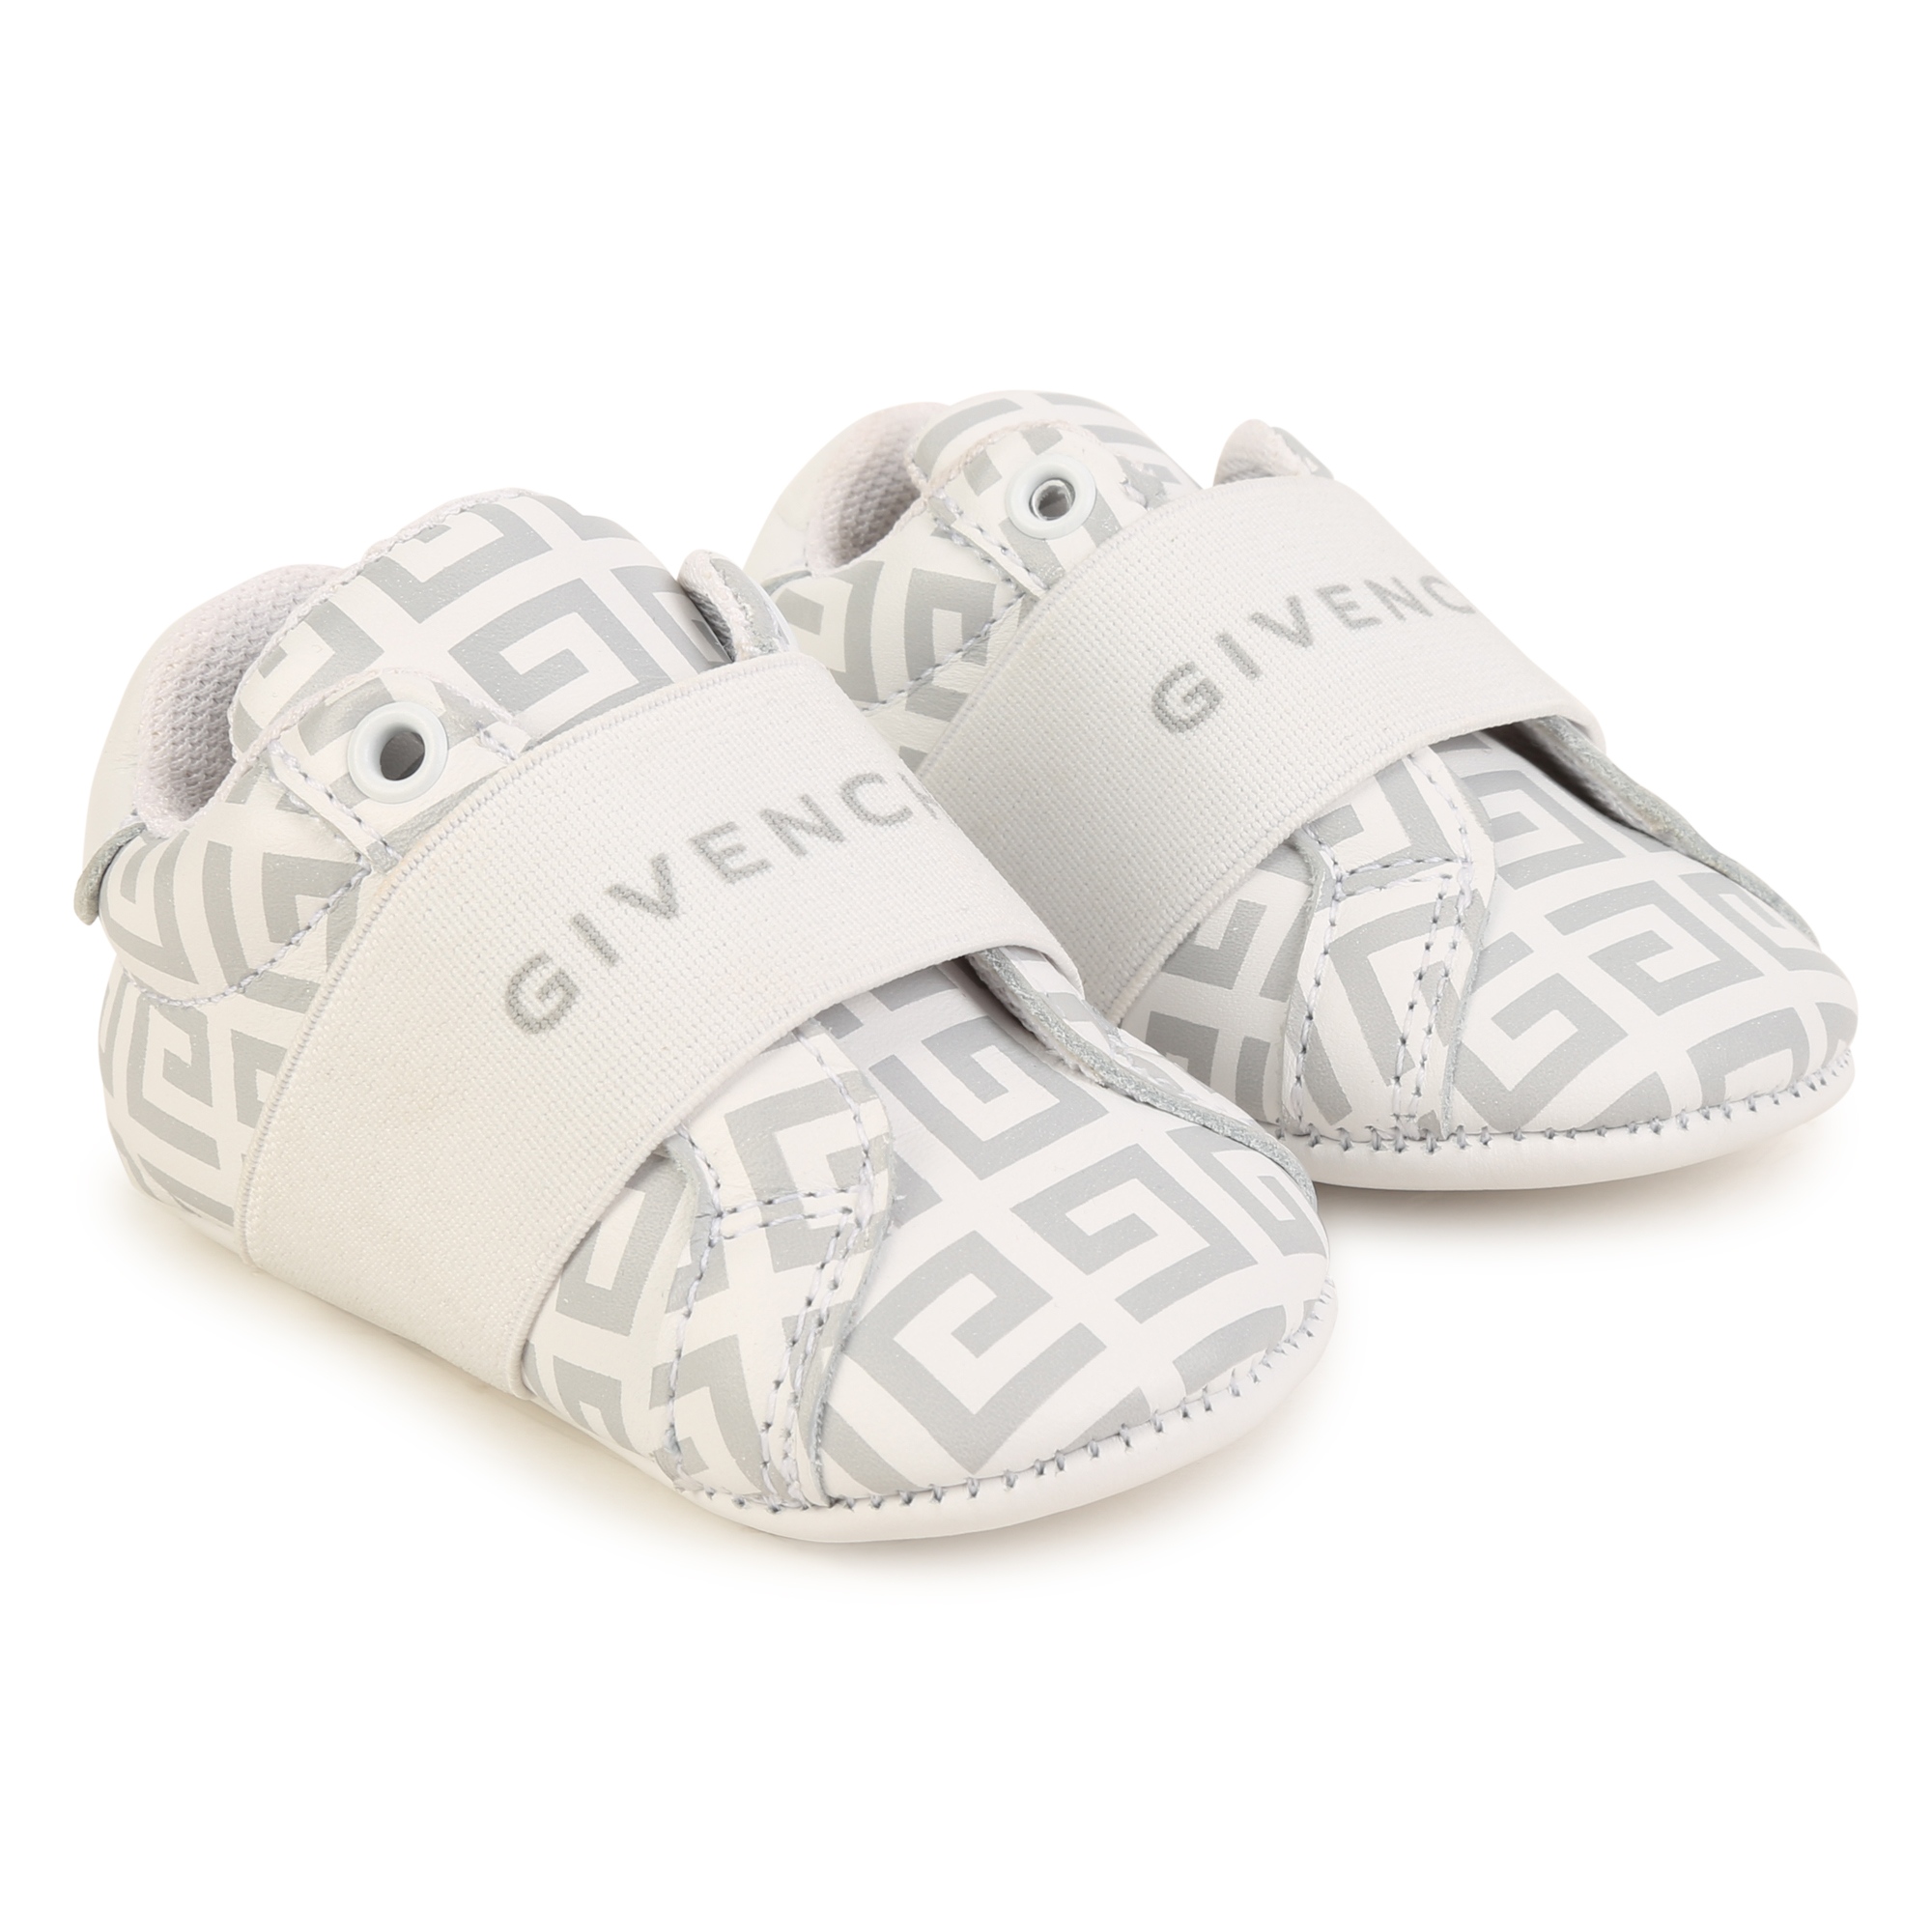 givenchy chaussons en cuir unisexe 17 gris